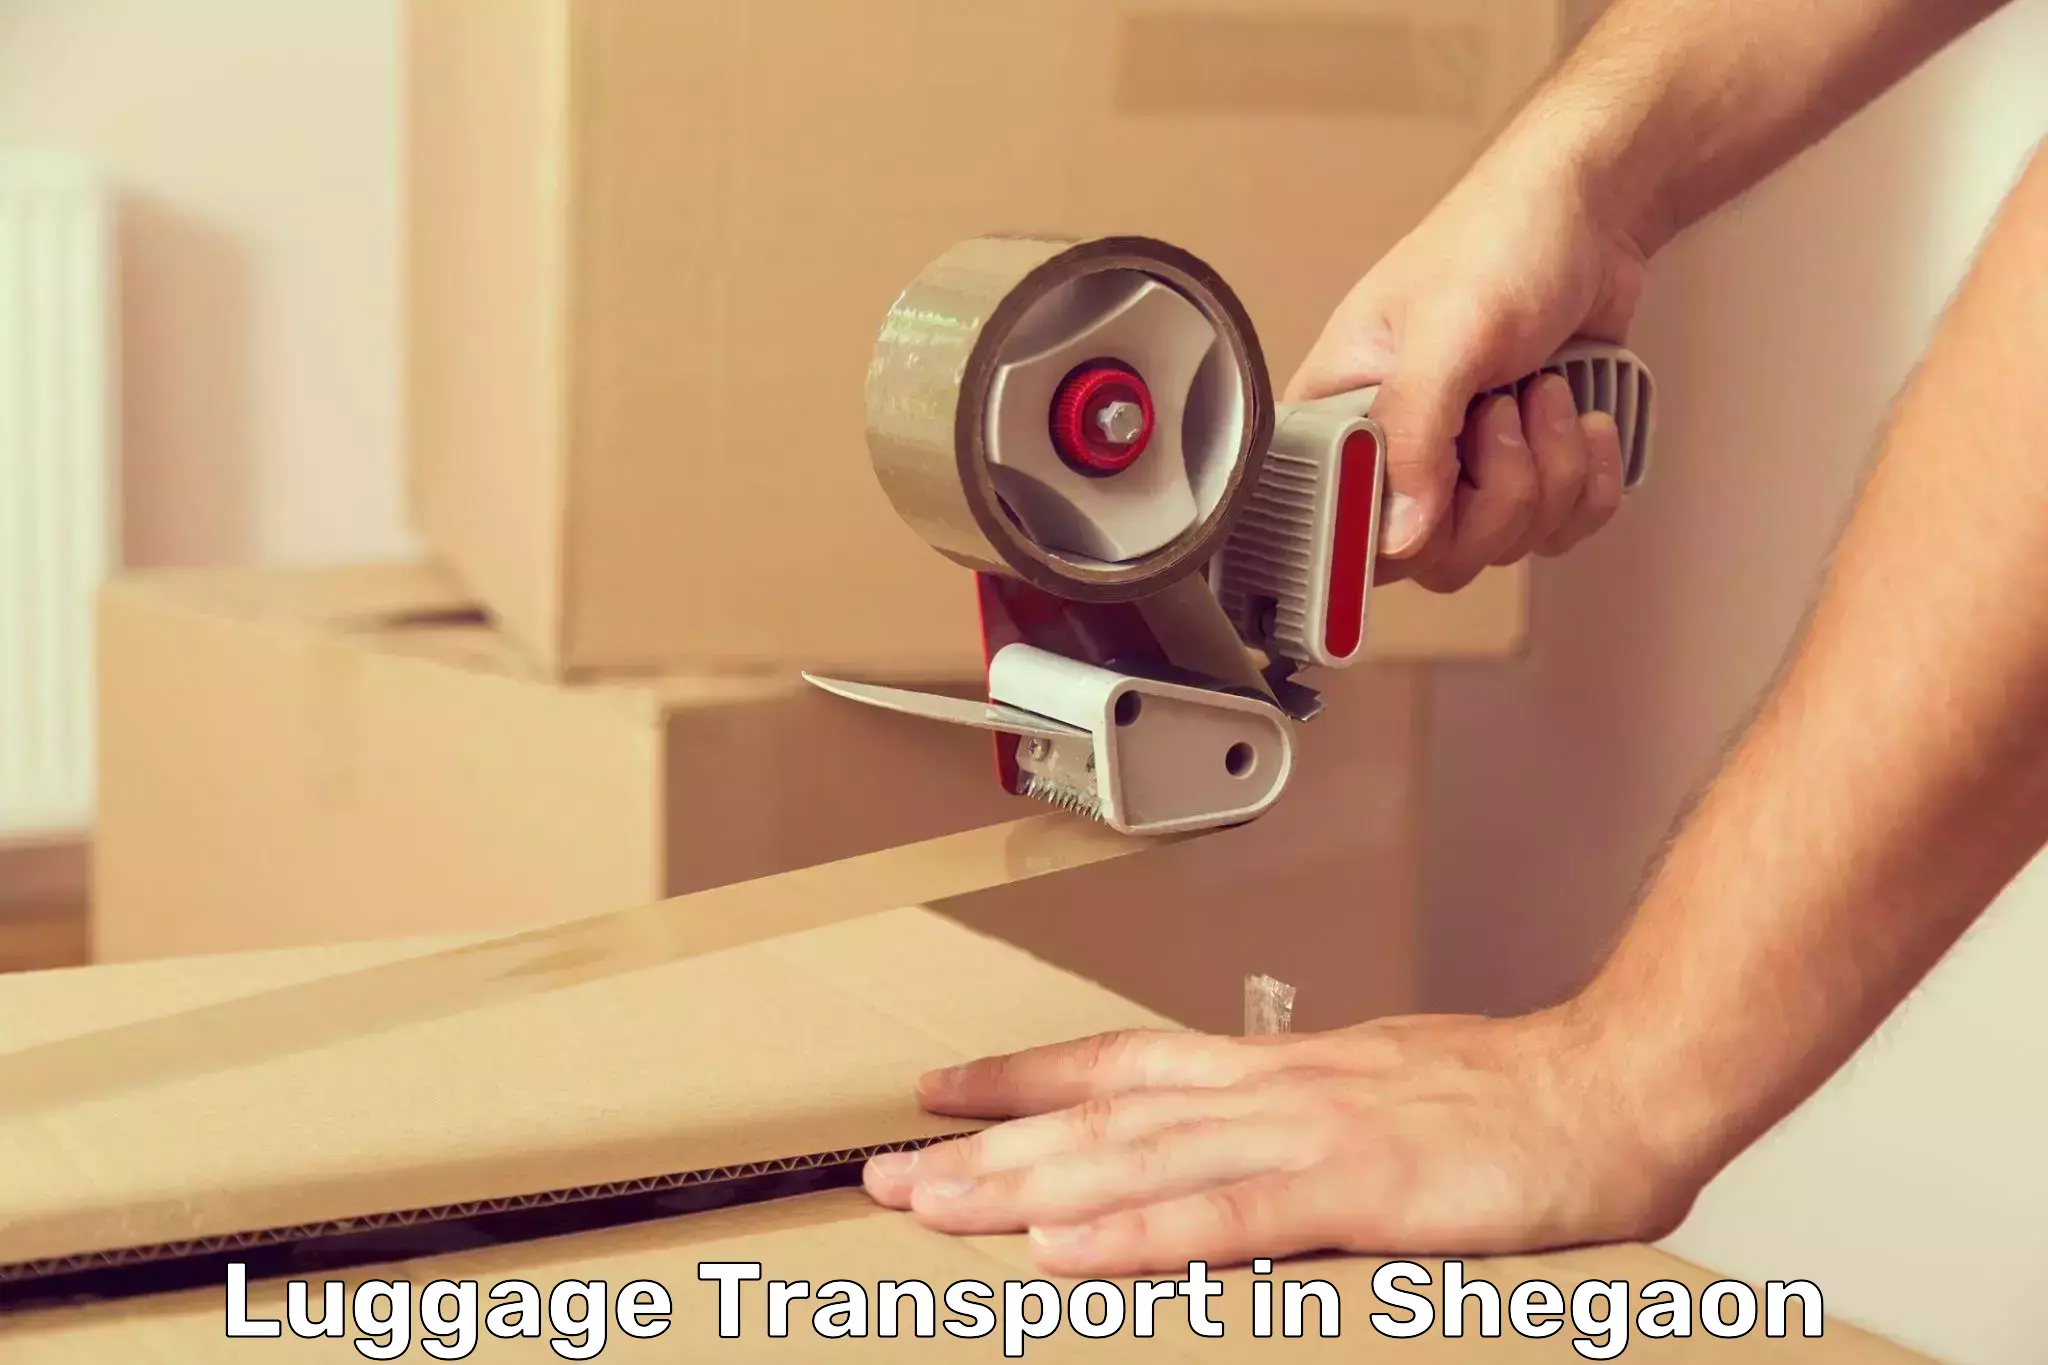 Luggage transport service in Shegaon